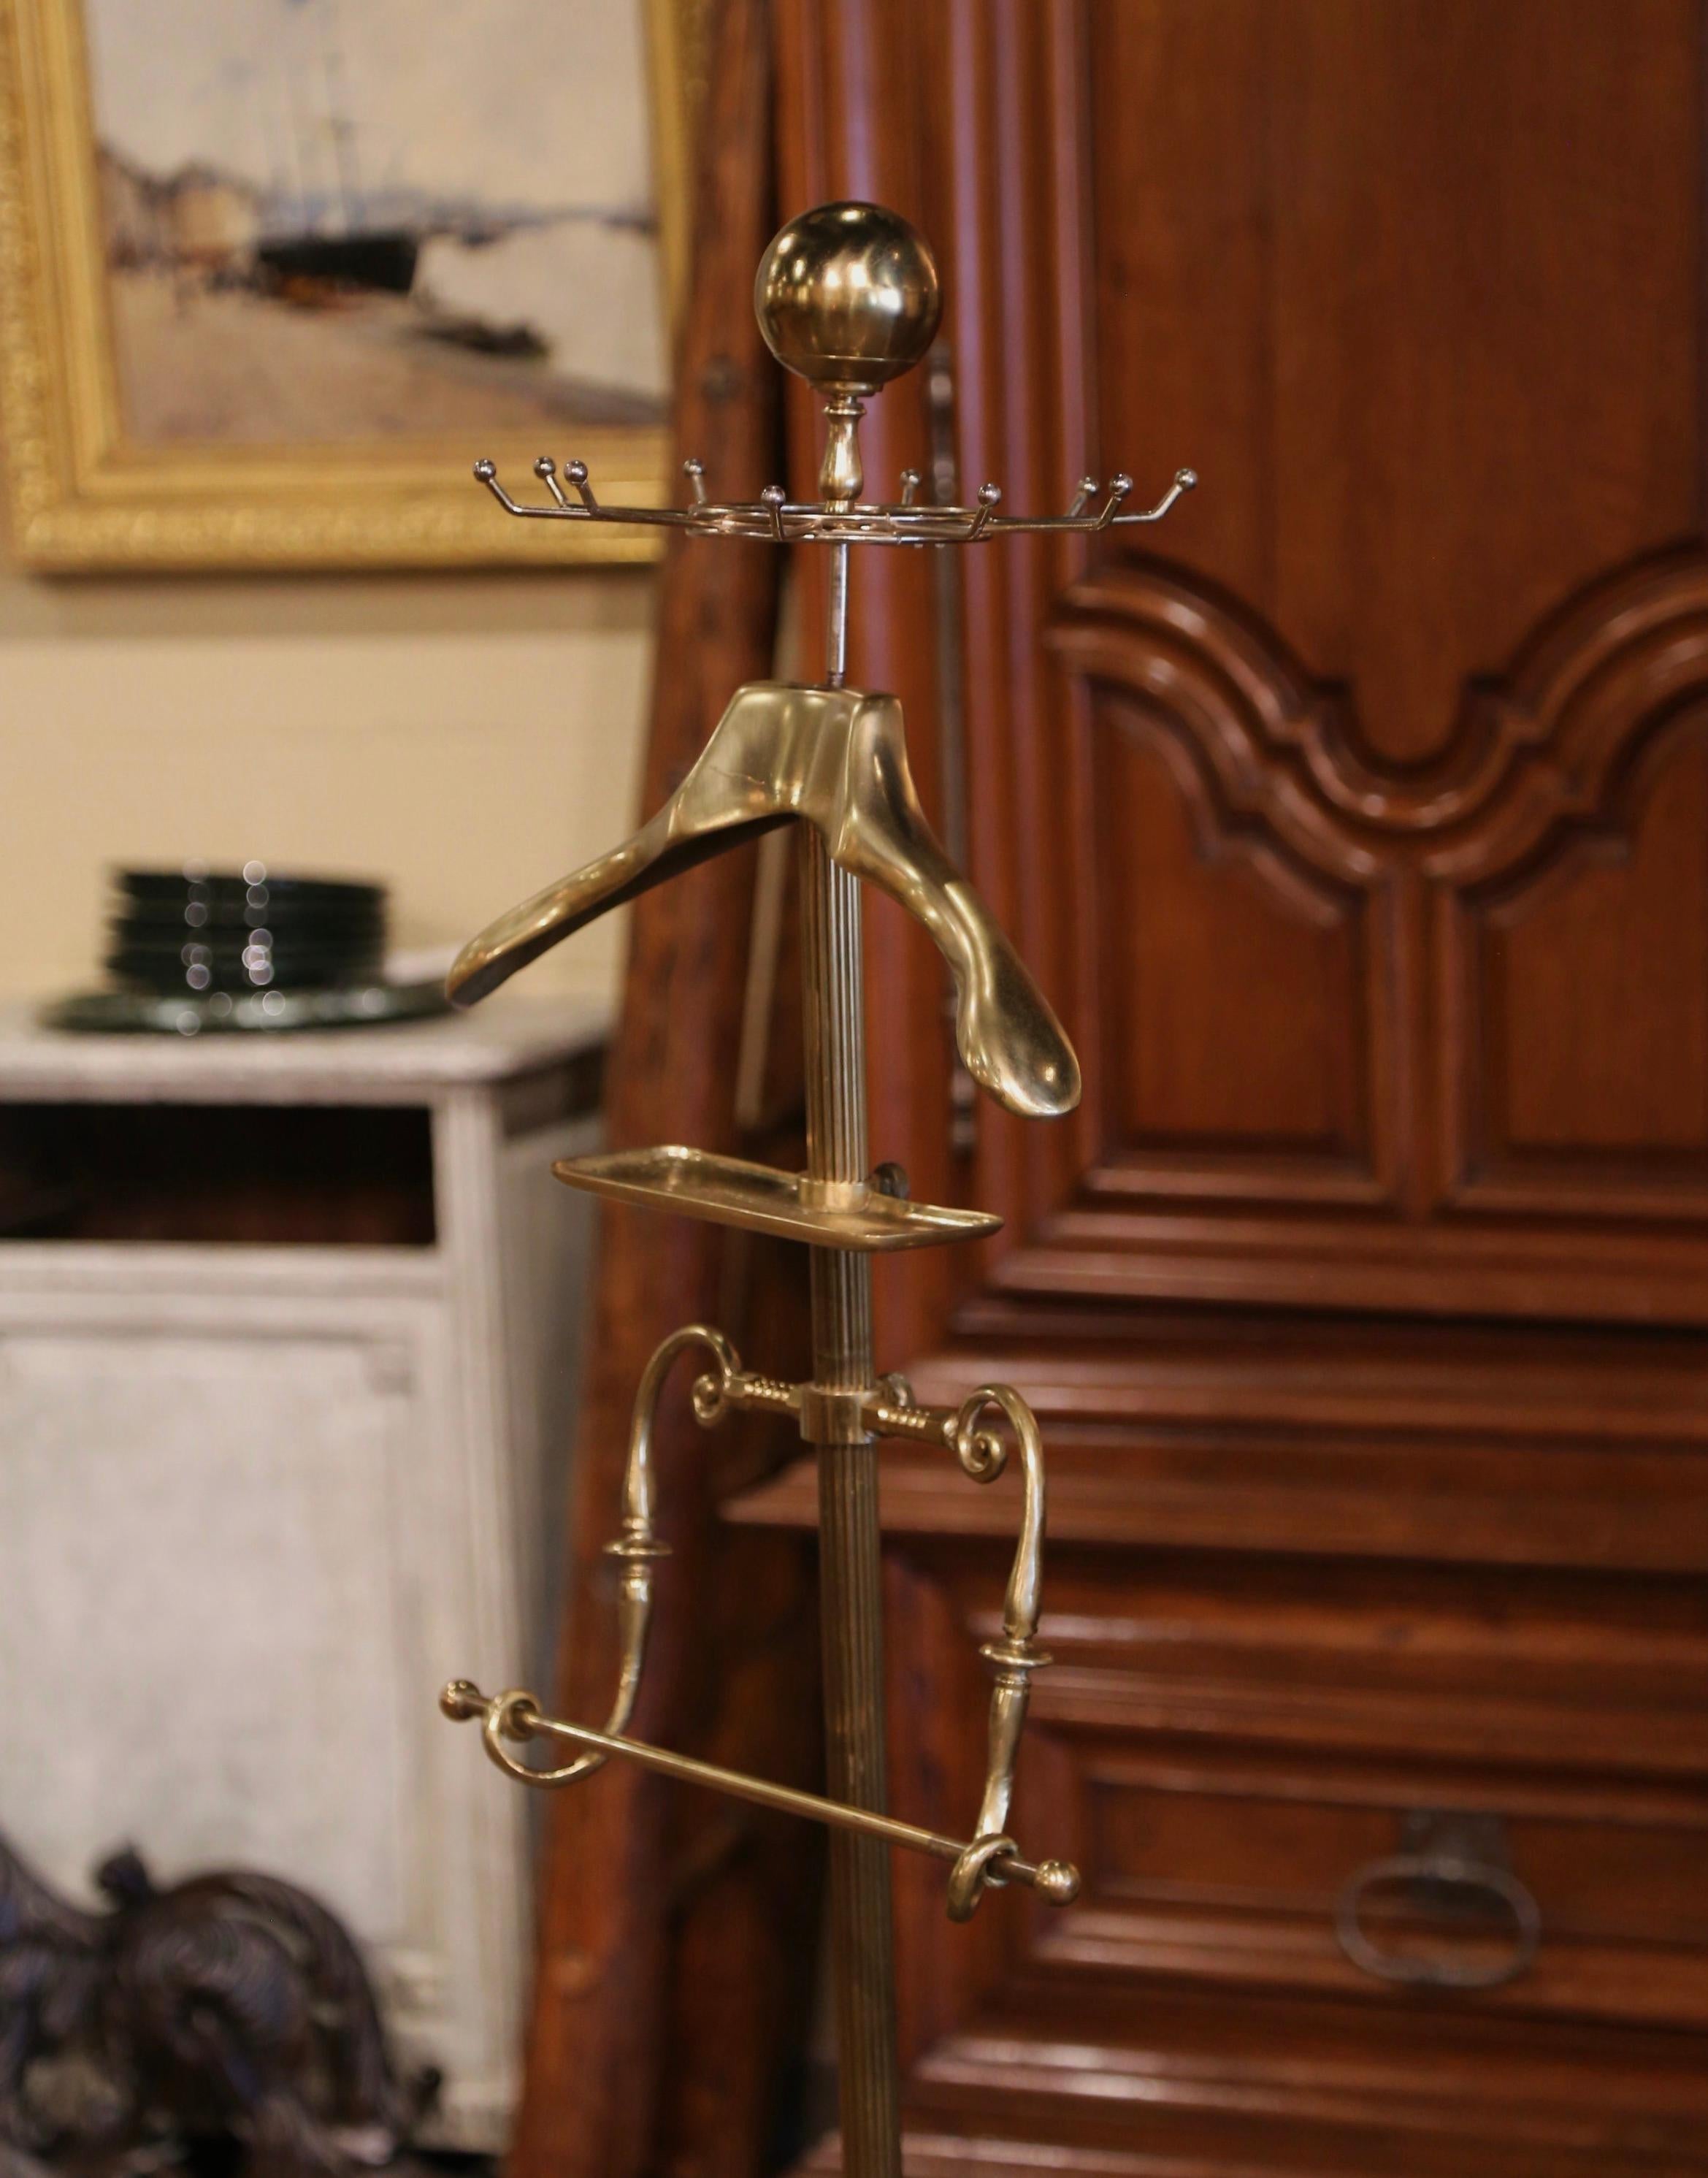 Early 20th Century French Gilt Brass Jacket Hanger Bathroom Coat Stand In Excellent Condition For Sale In Dallas, TX